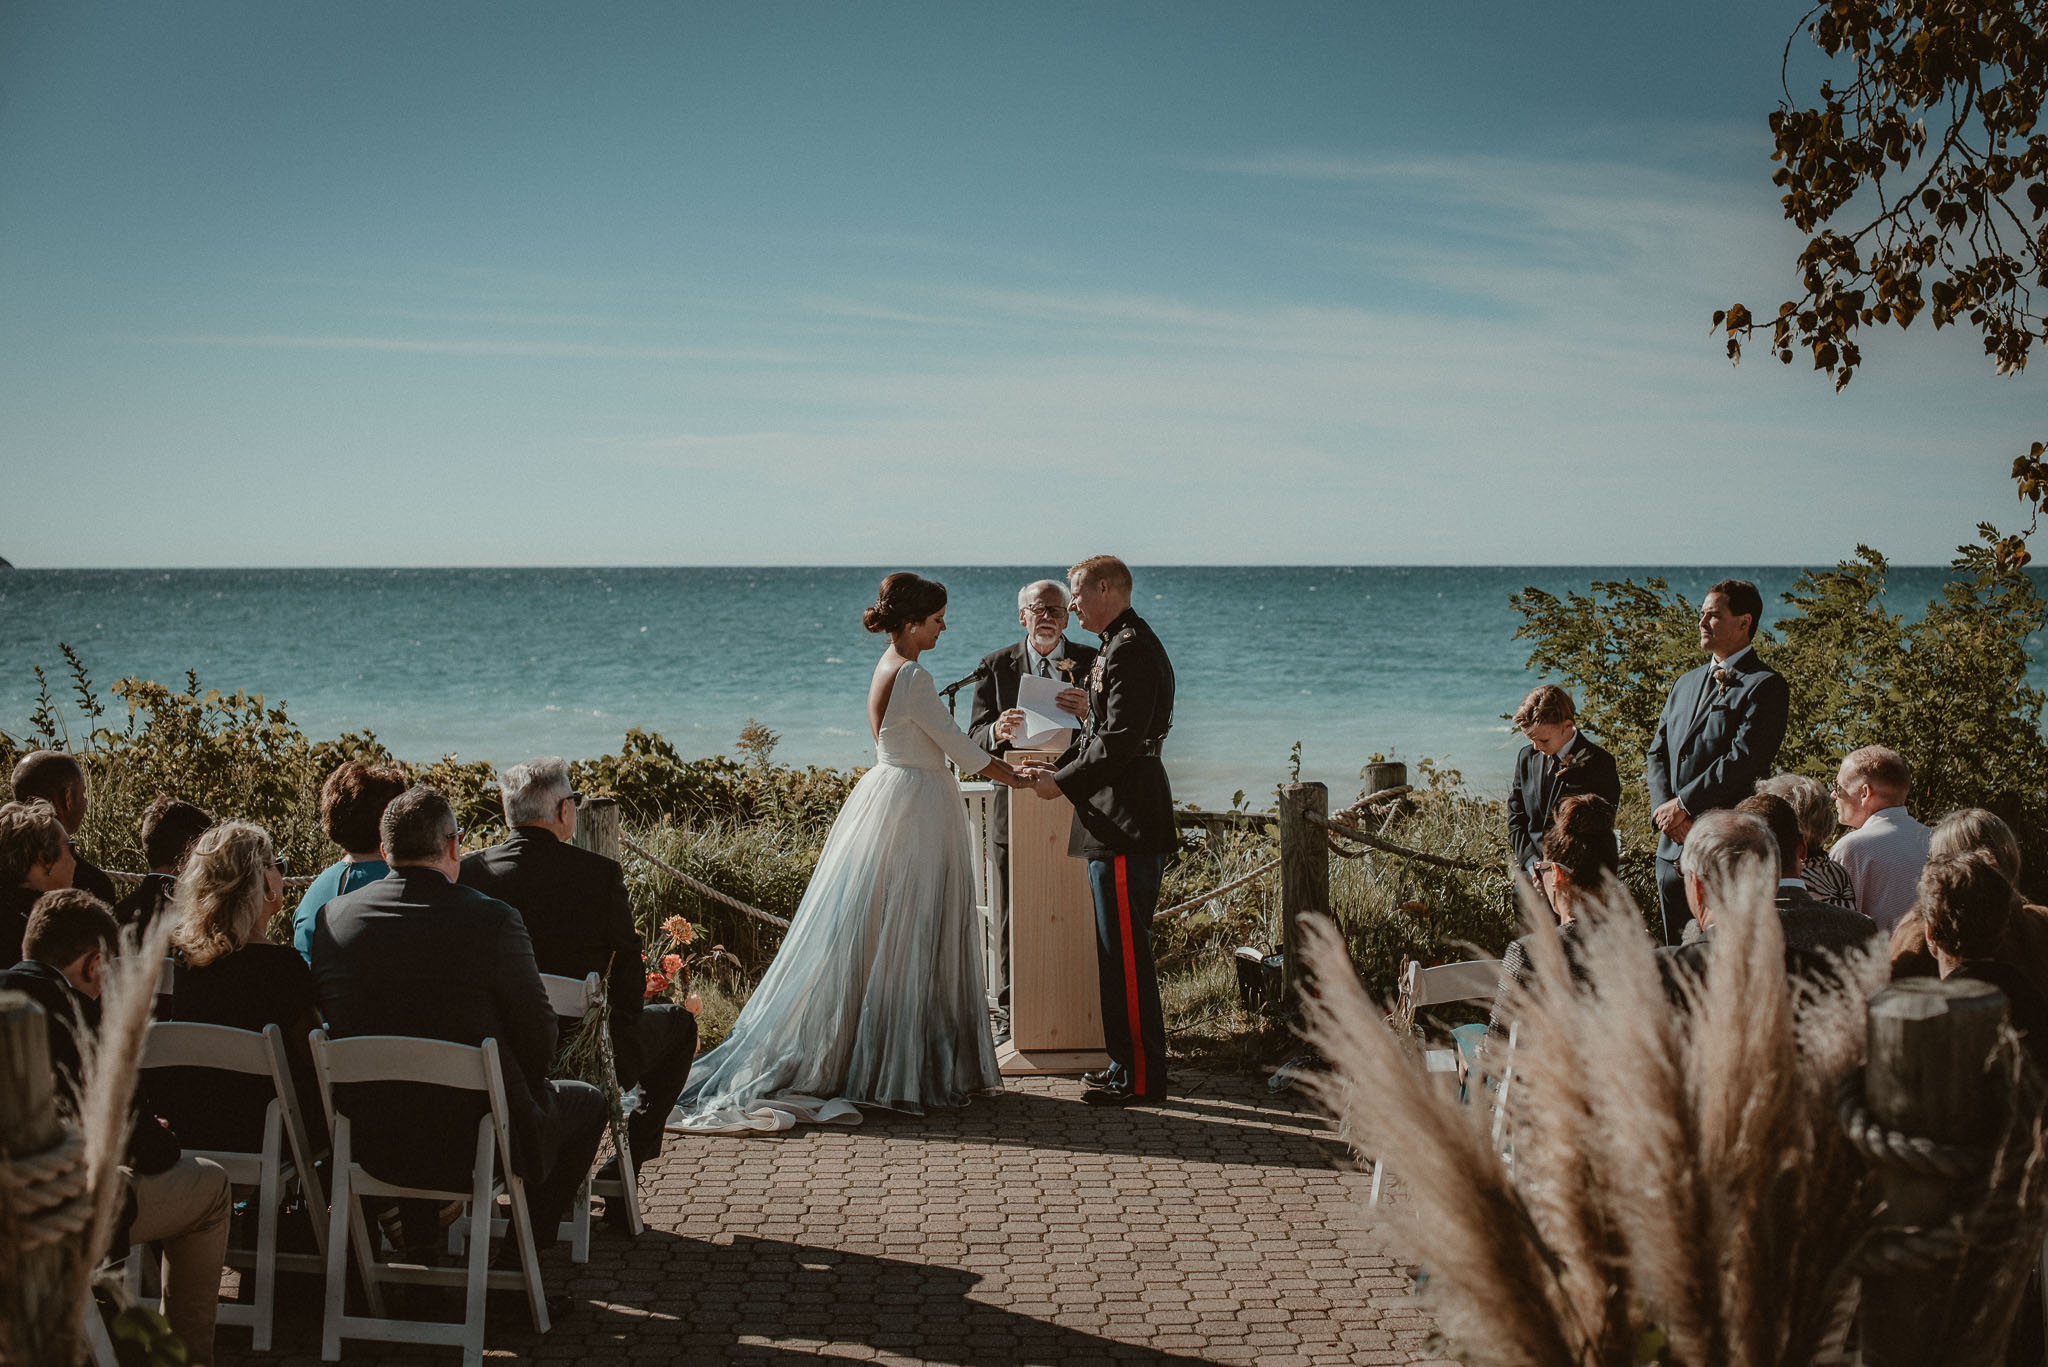 The bride and groom at the alter holding hands during the ceremony with Lake Michigan as a backdrop.